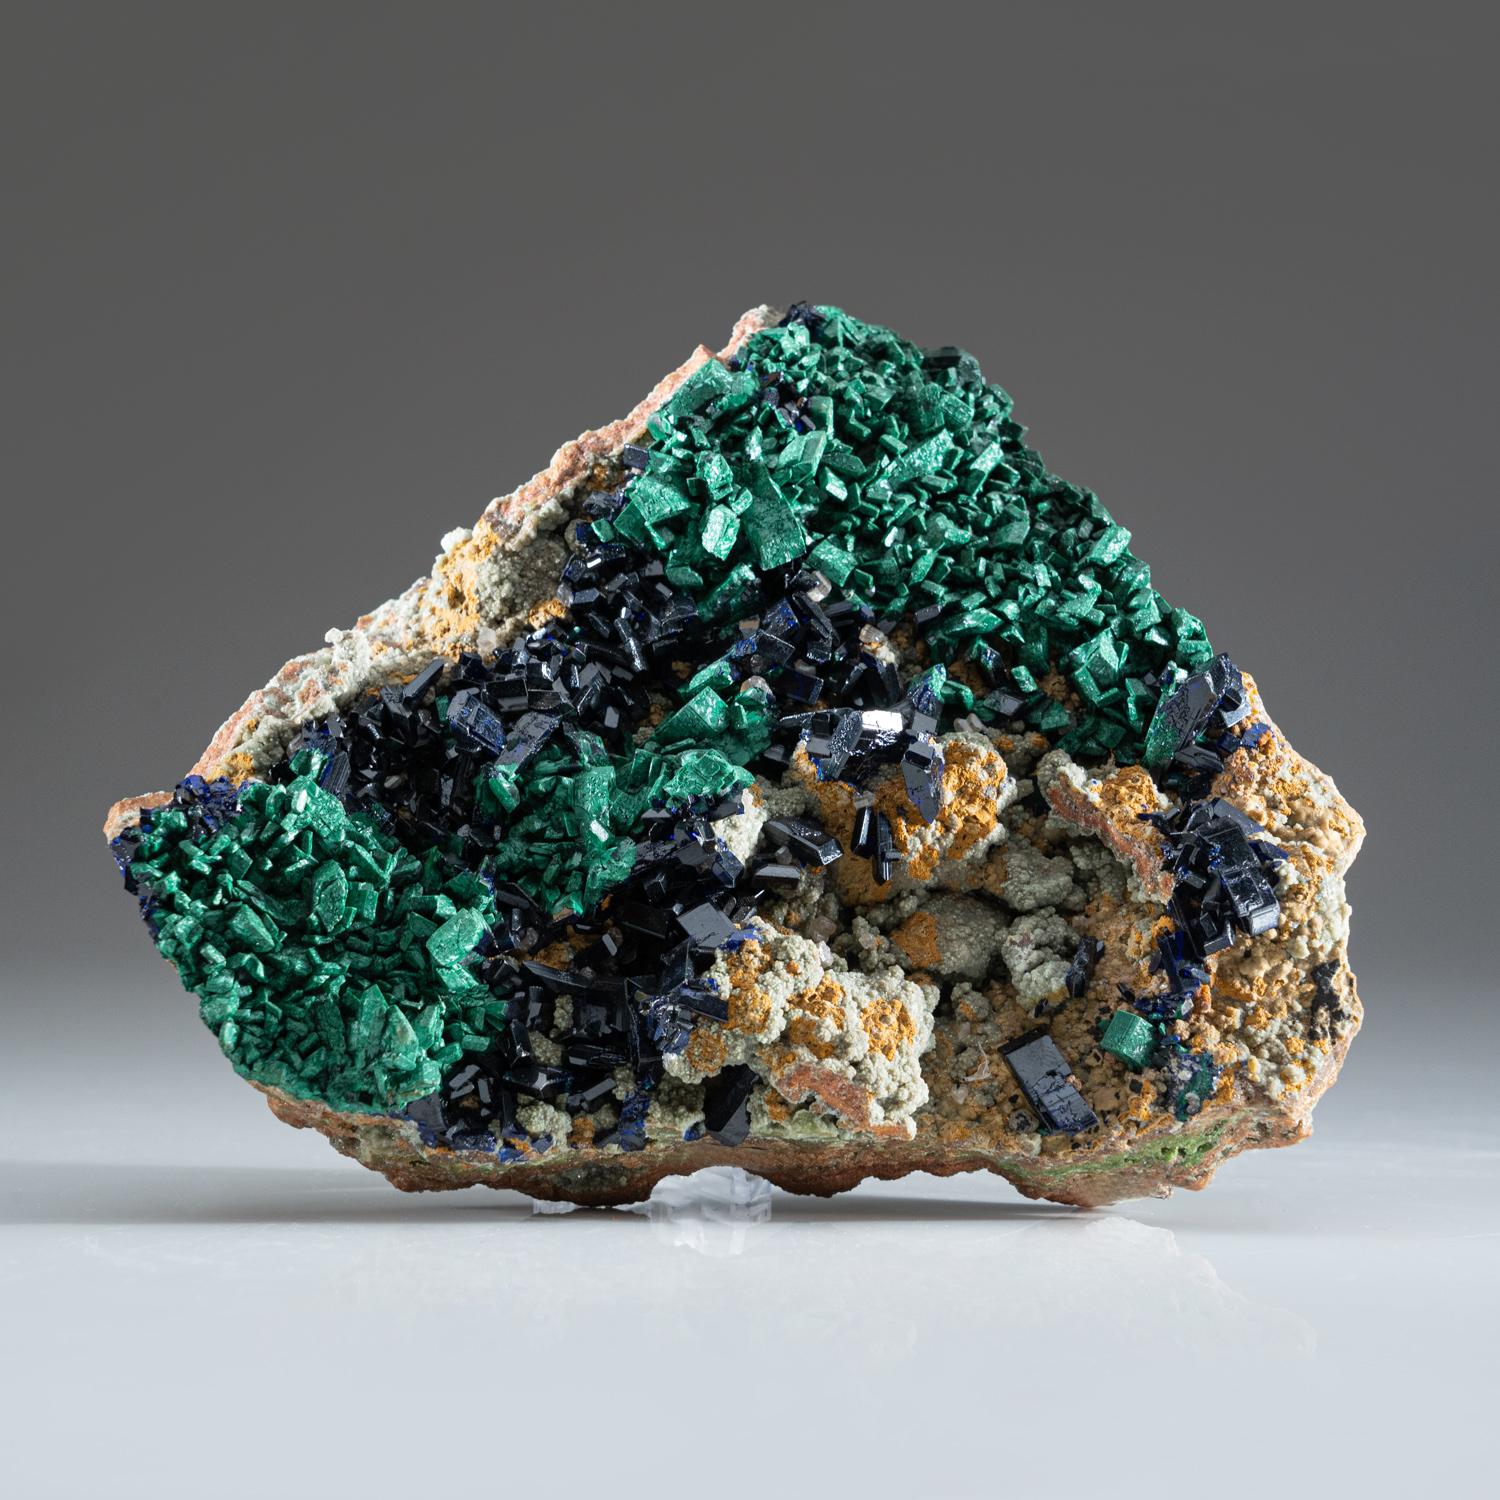 Azurite and Malachite from Tsumeb Mine, Otavi-Bergland District, Oshikoto, Namibia

Rich cluster of lustrous dark-blue azurite crystals on malachite-duftite-calcite matrix. All of the azurite crystals are highly lustrous with complex crystal